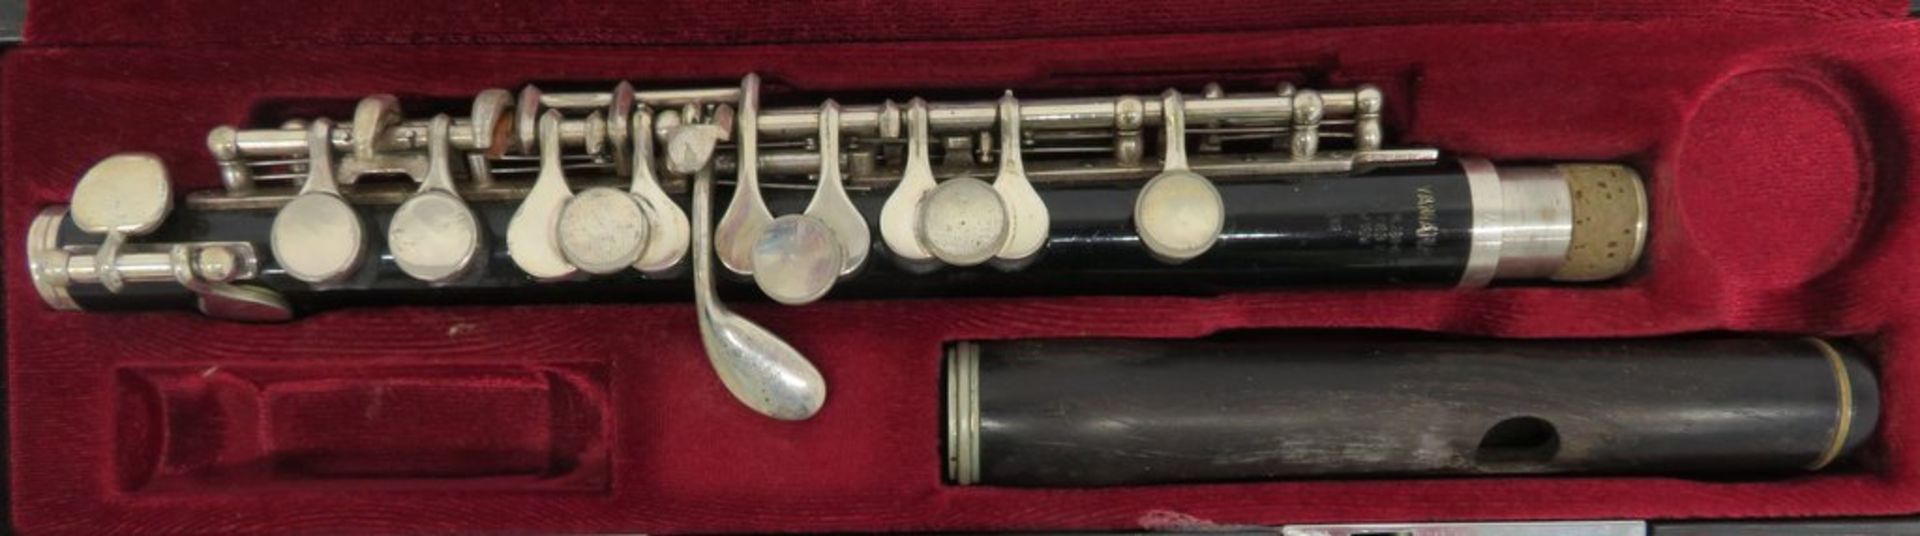 Yamaha PC32 Piccolo With Case. Serial Number: 58774. Please Note That This Item Has Not Be - Image 2 of 8